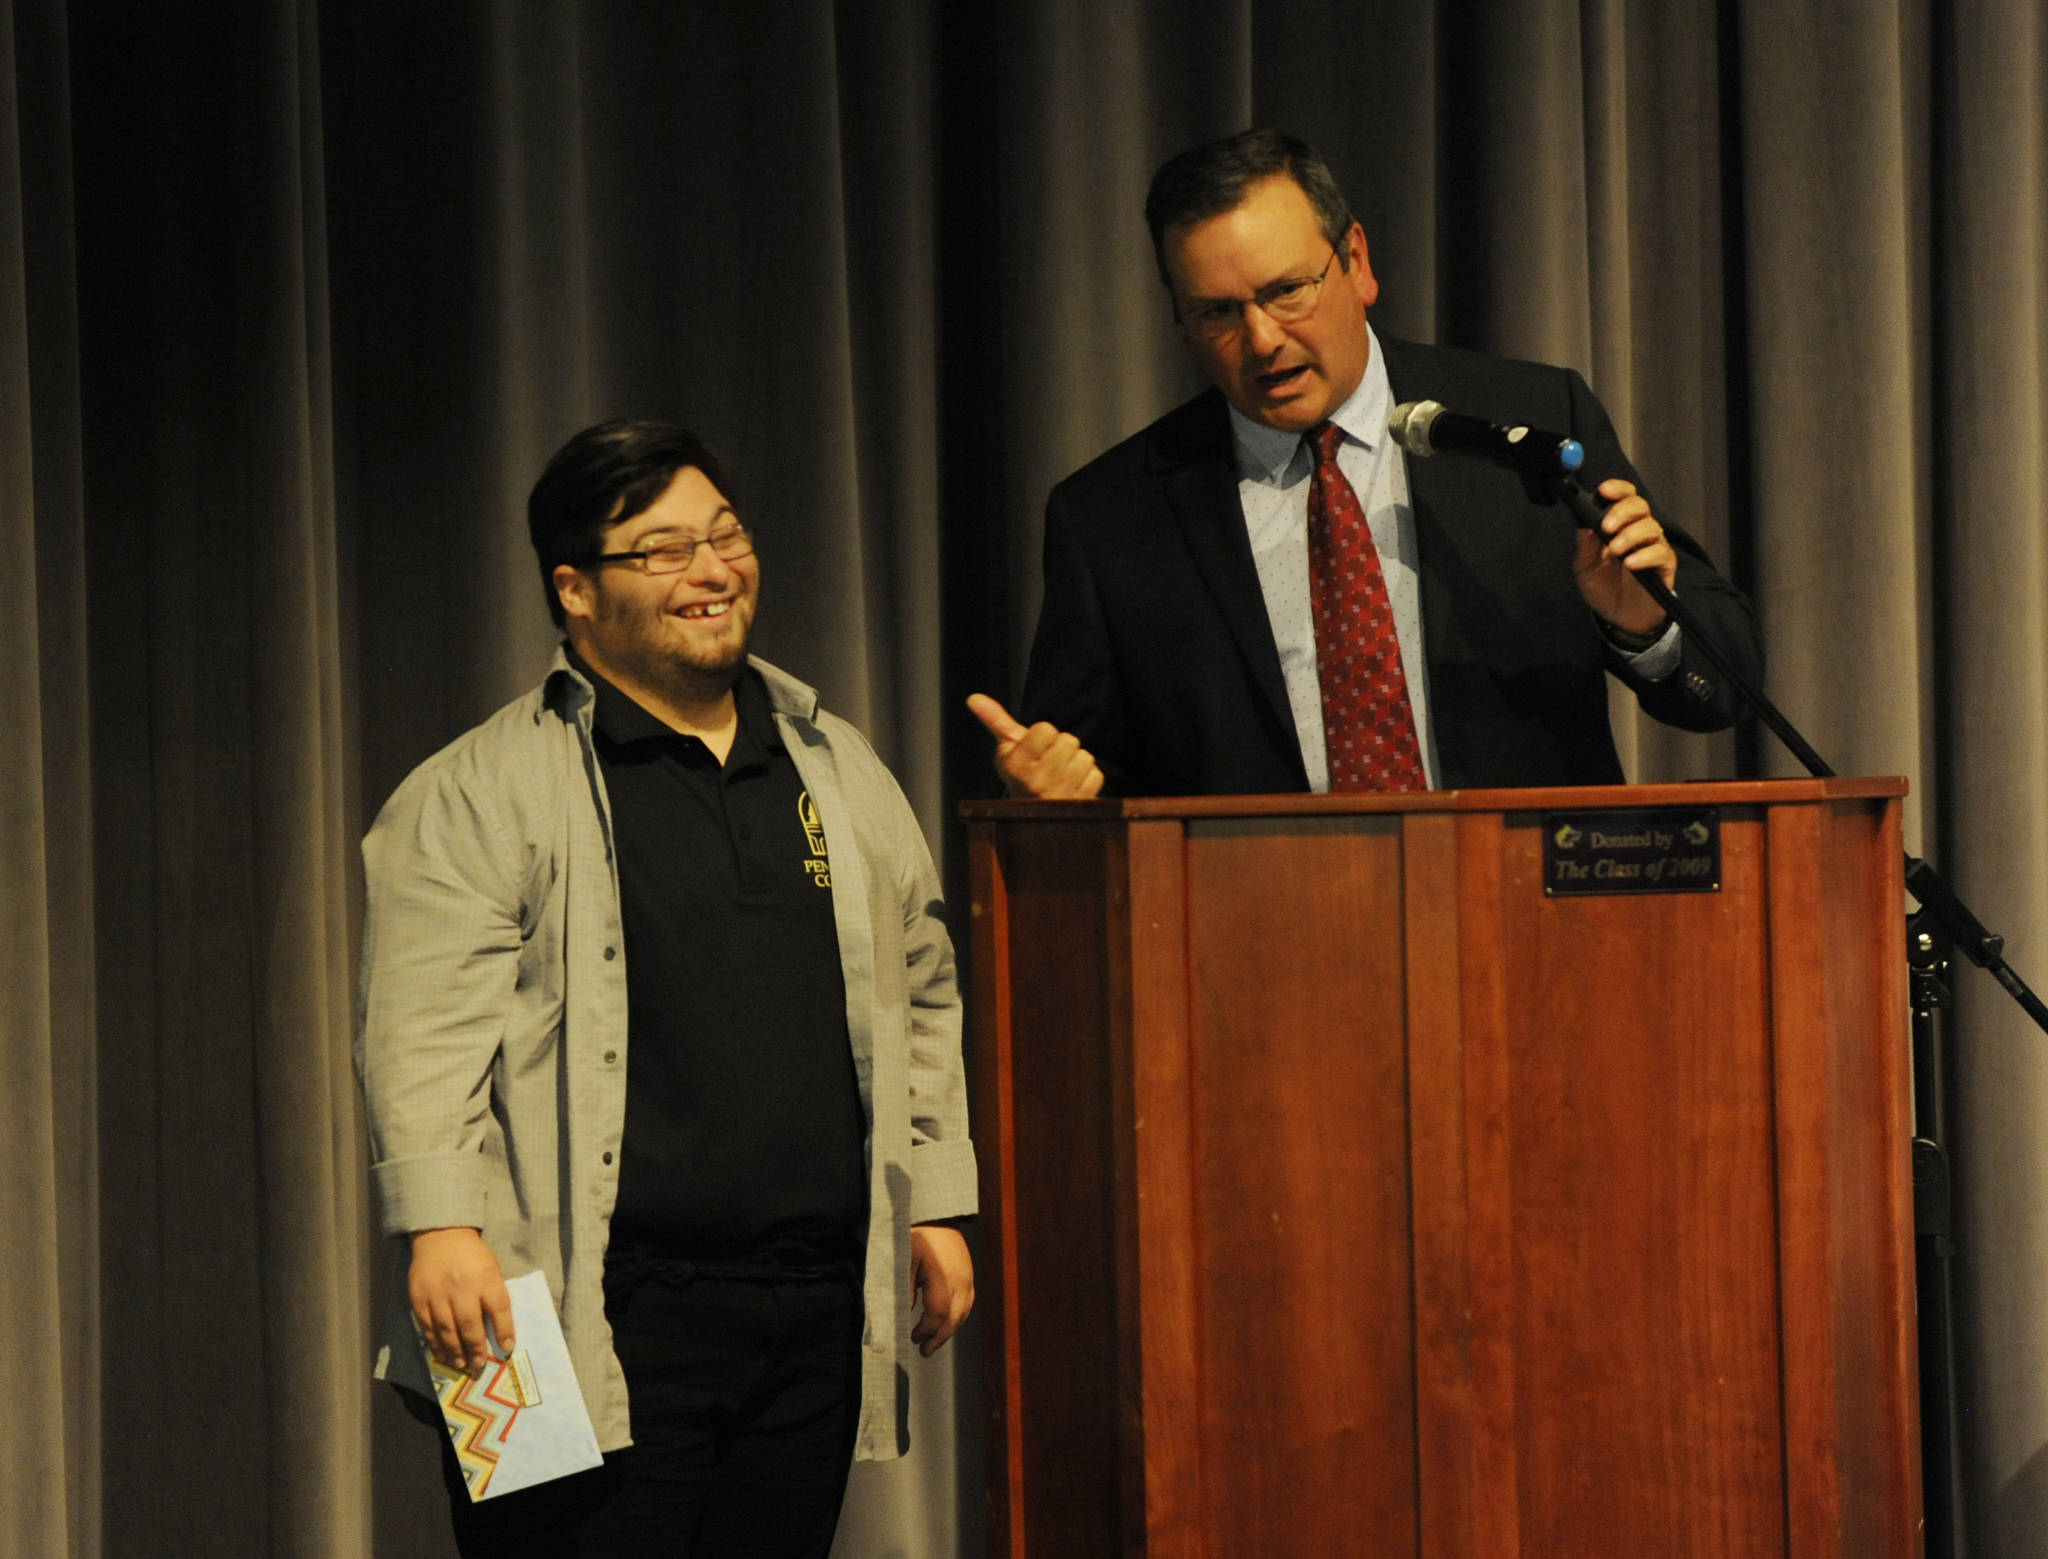 Sequim High School principal Shawn Langston, right, jokes with scholarship recipient Nicholas Barrett at last week’s Scholarship Awards assembly. Barrett received $3,000 in scholarships and plans to attend Peninsula College. Sequim Gazette photo by Michael Dashiell